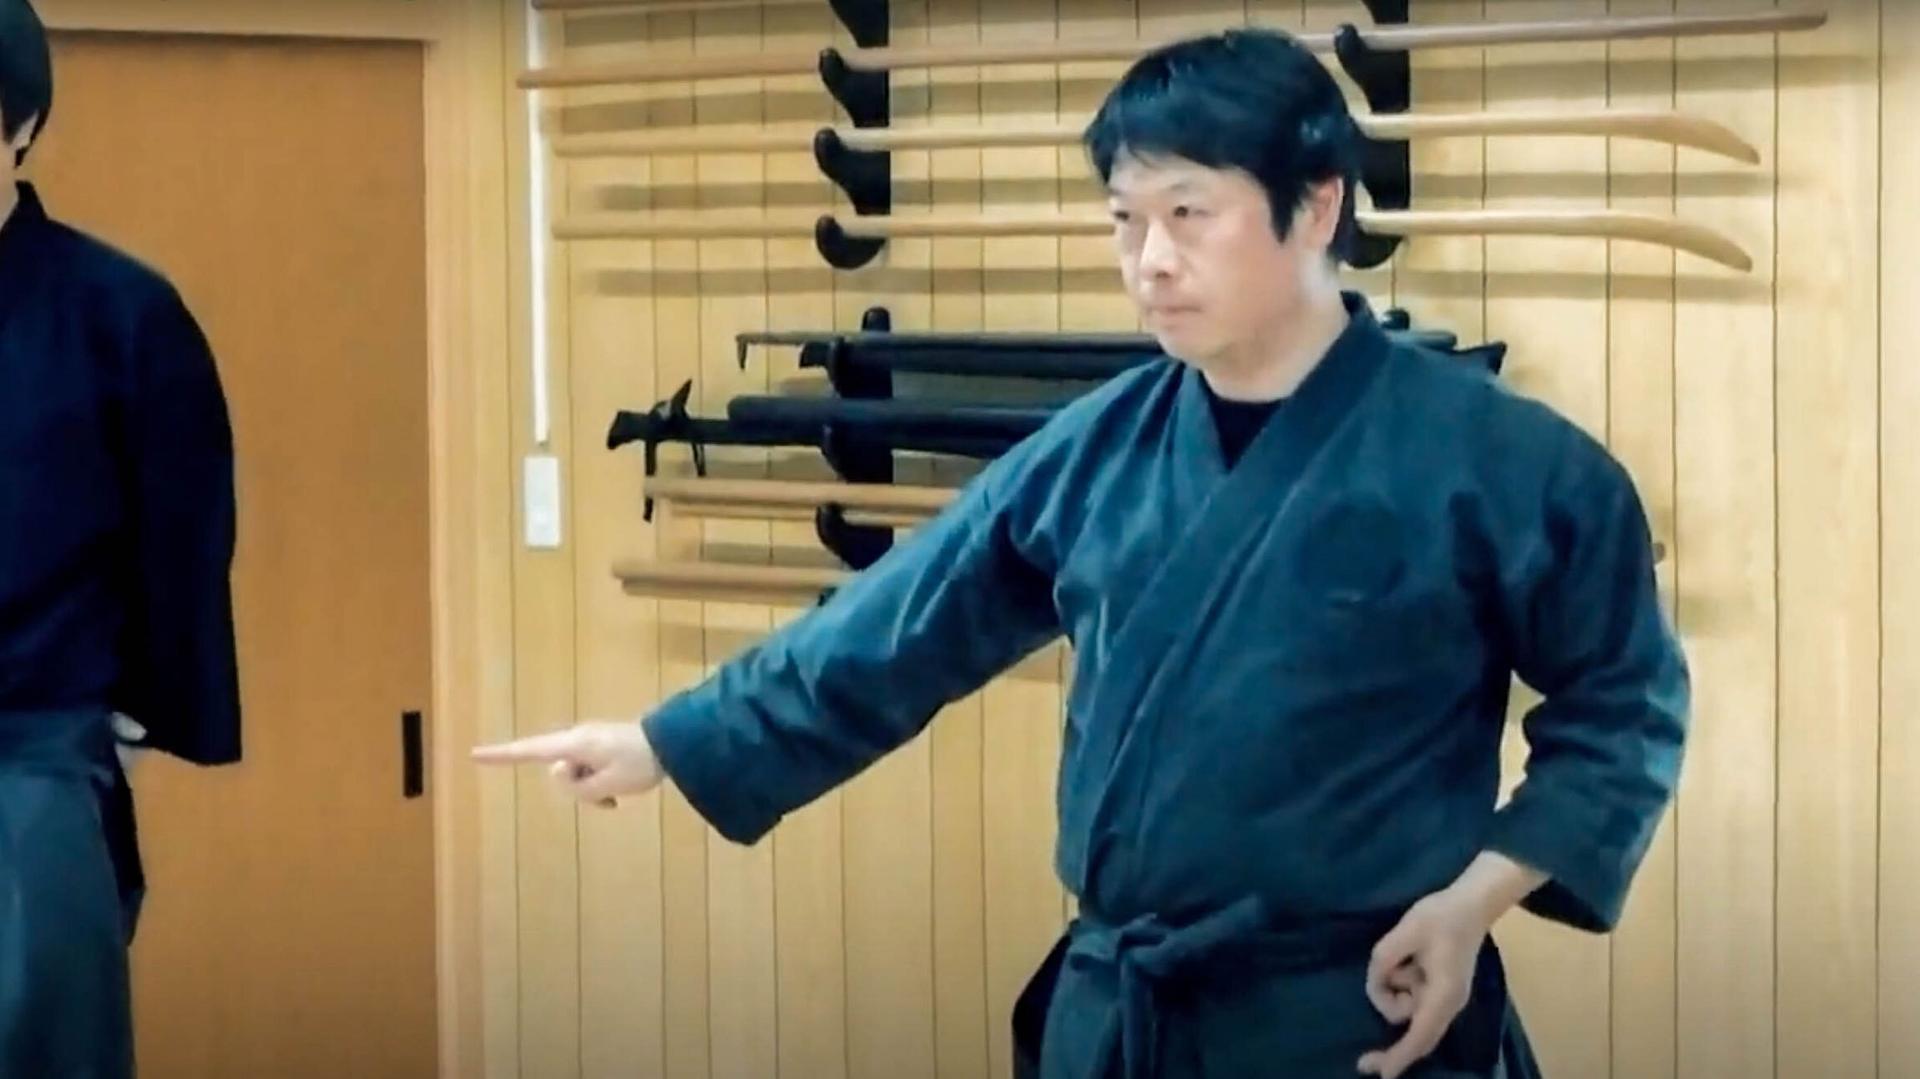 A man wears black and practices a ninja move.